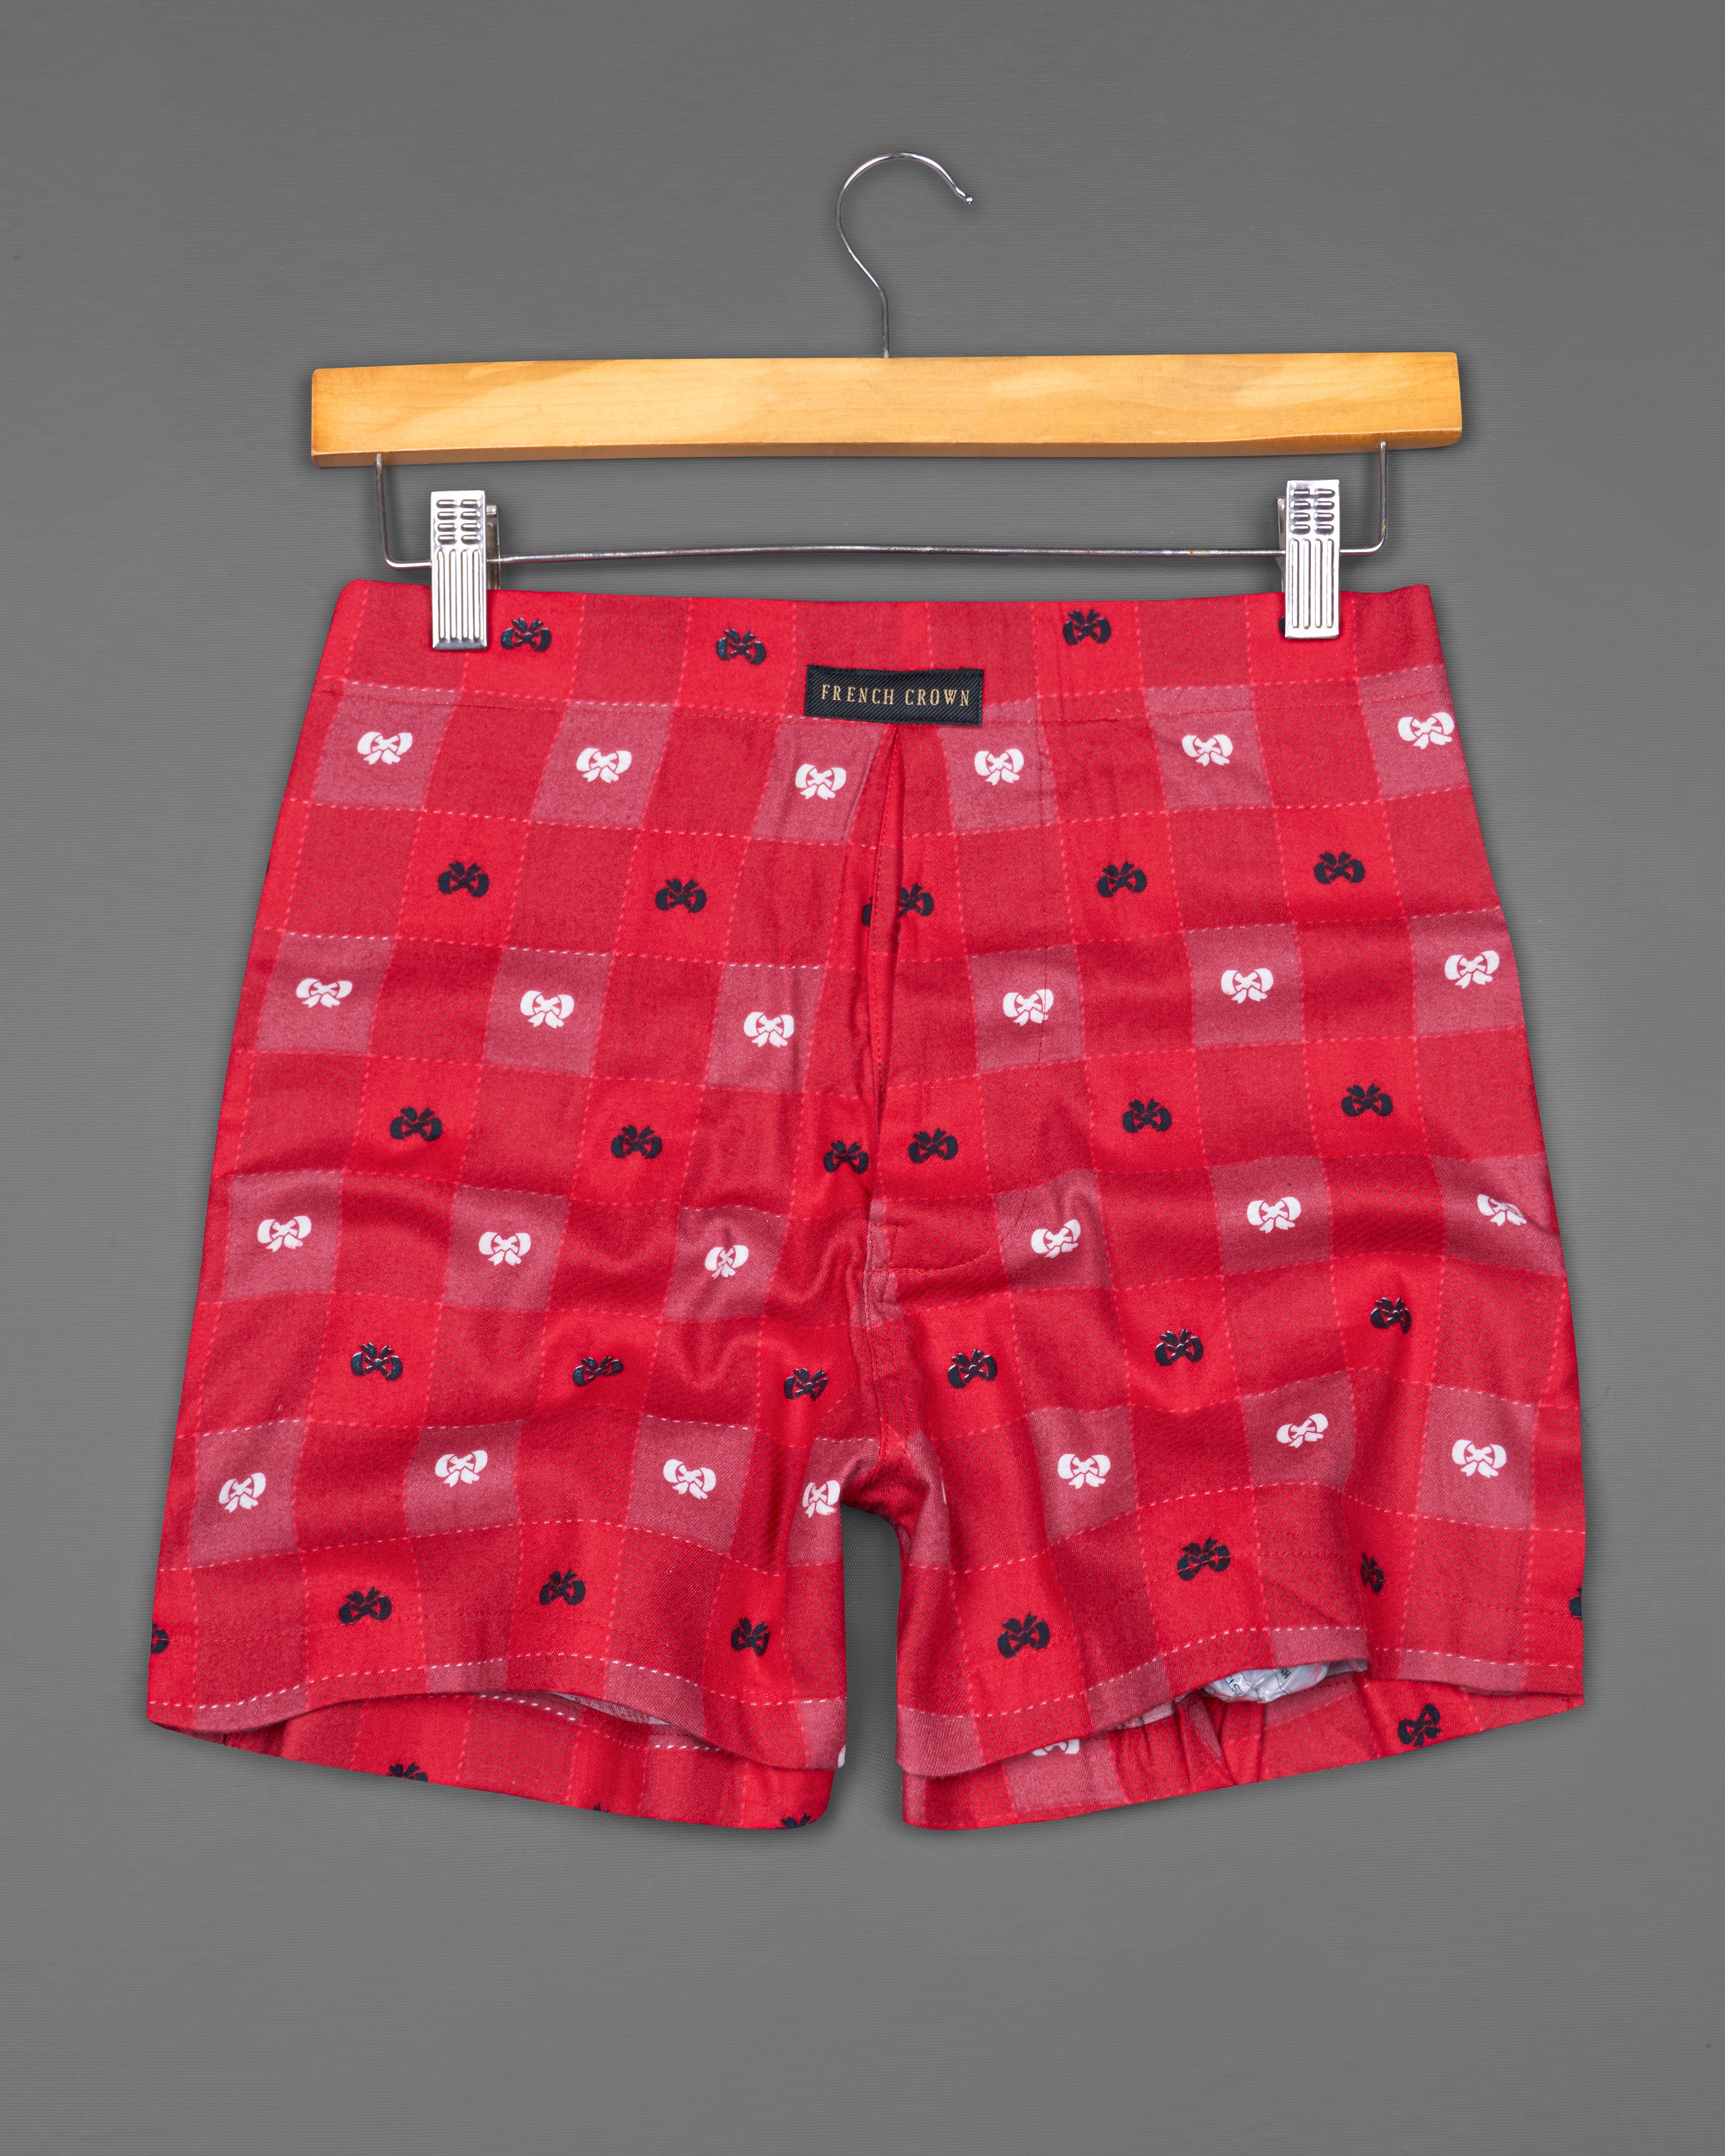 Cardinal Red with Pastel Pink Windowpane Twill Premium Cotton Boxers BX505-28, BX505-30, BX505-32, BX505-34, BX505-36, BX505-38, BX505-40, BX505-42, BX505-44